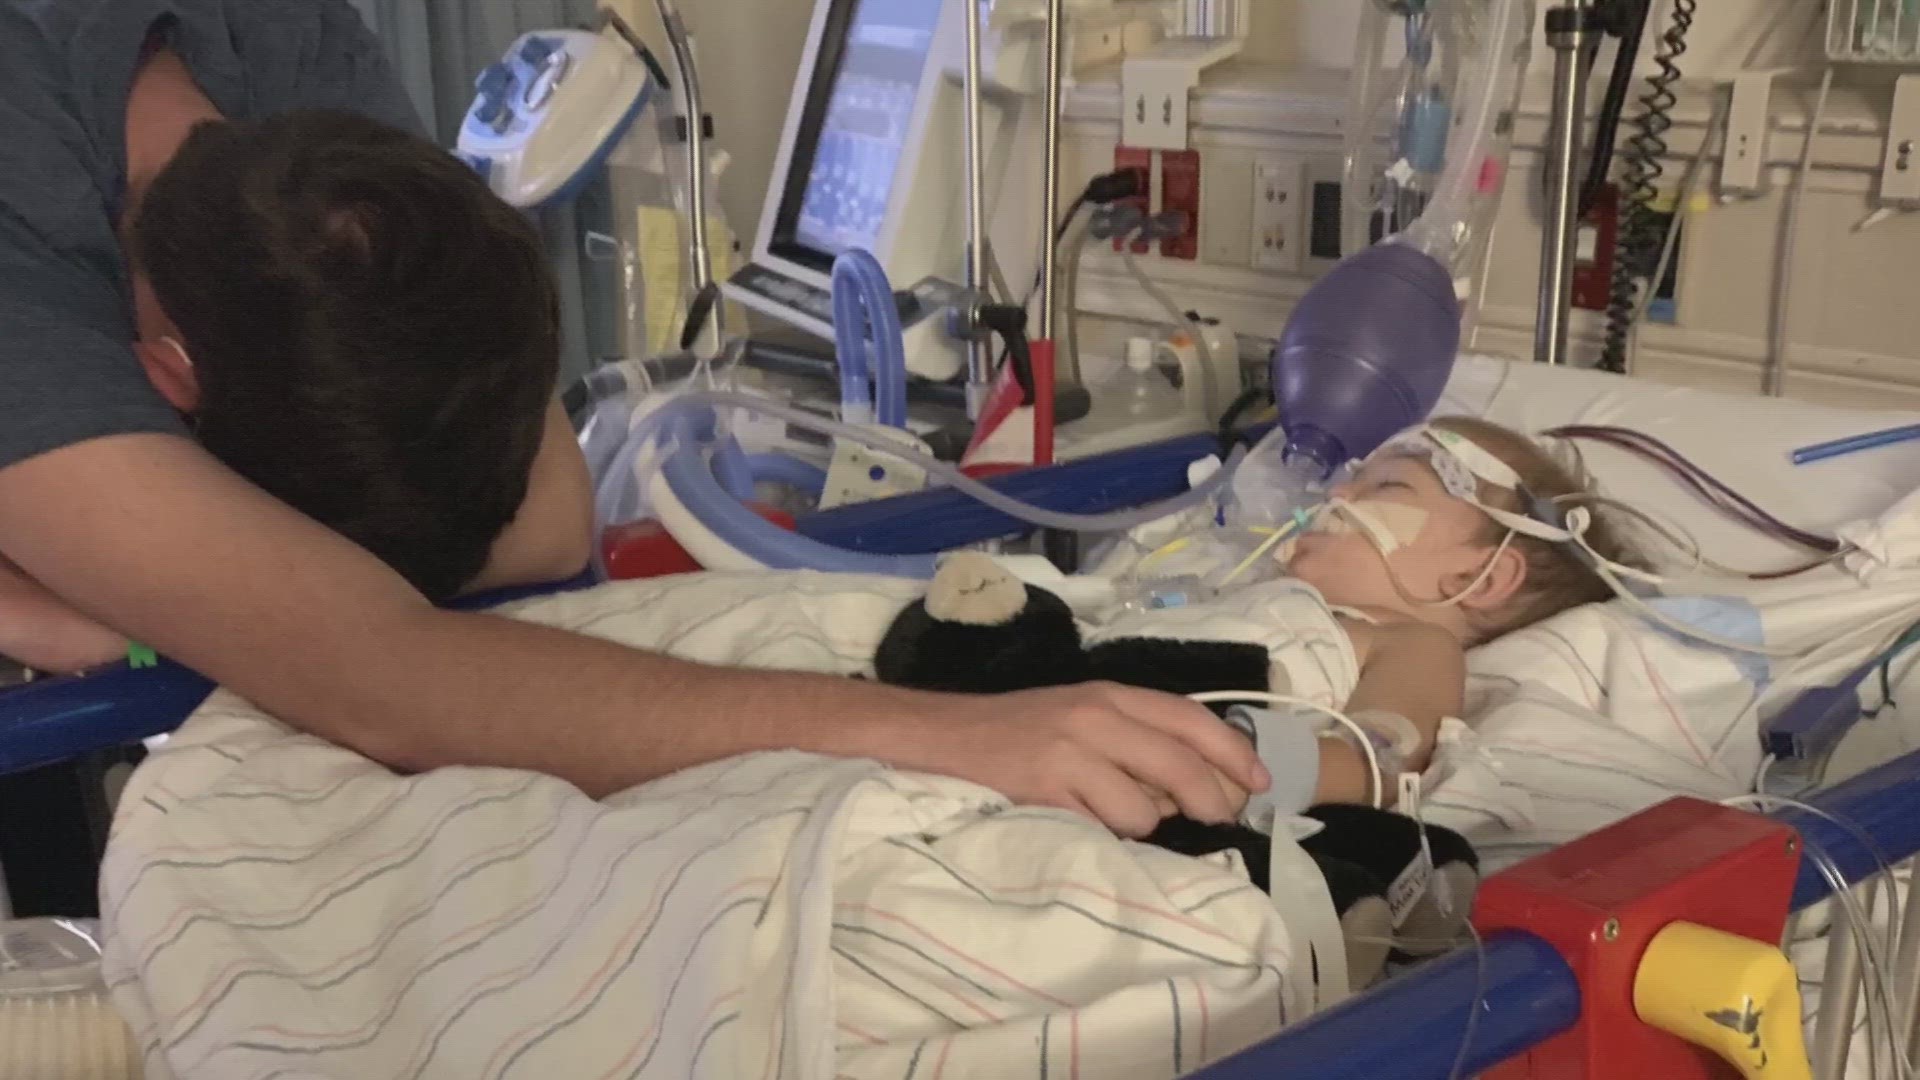 Medical Reporter Meg Farris has the story on this miraculous recovery.